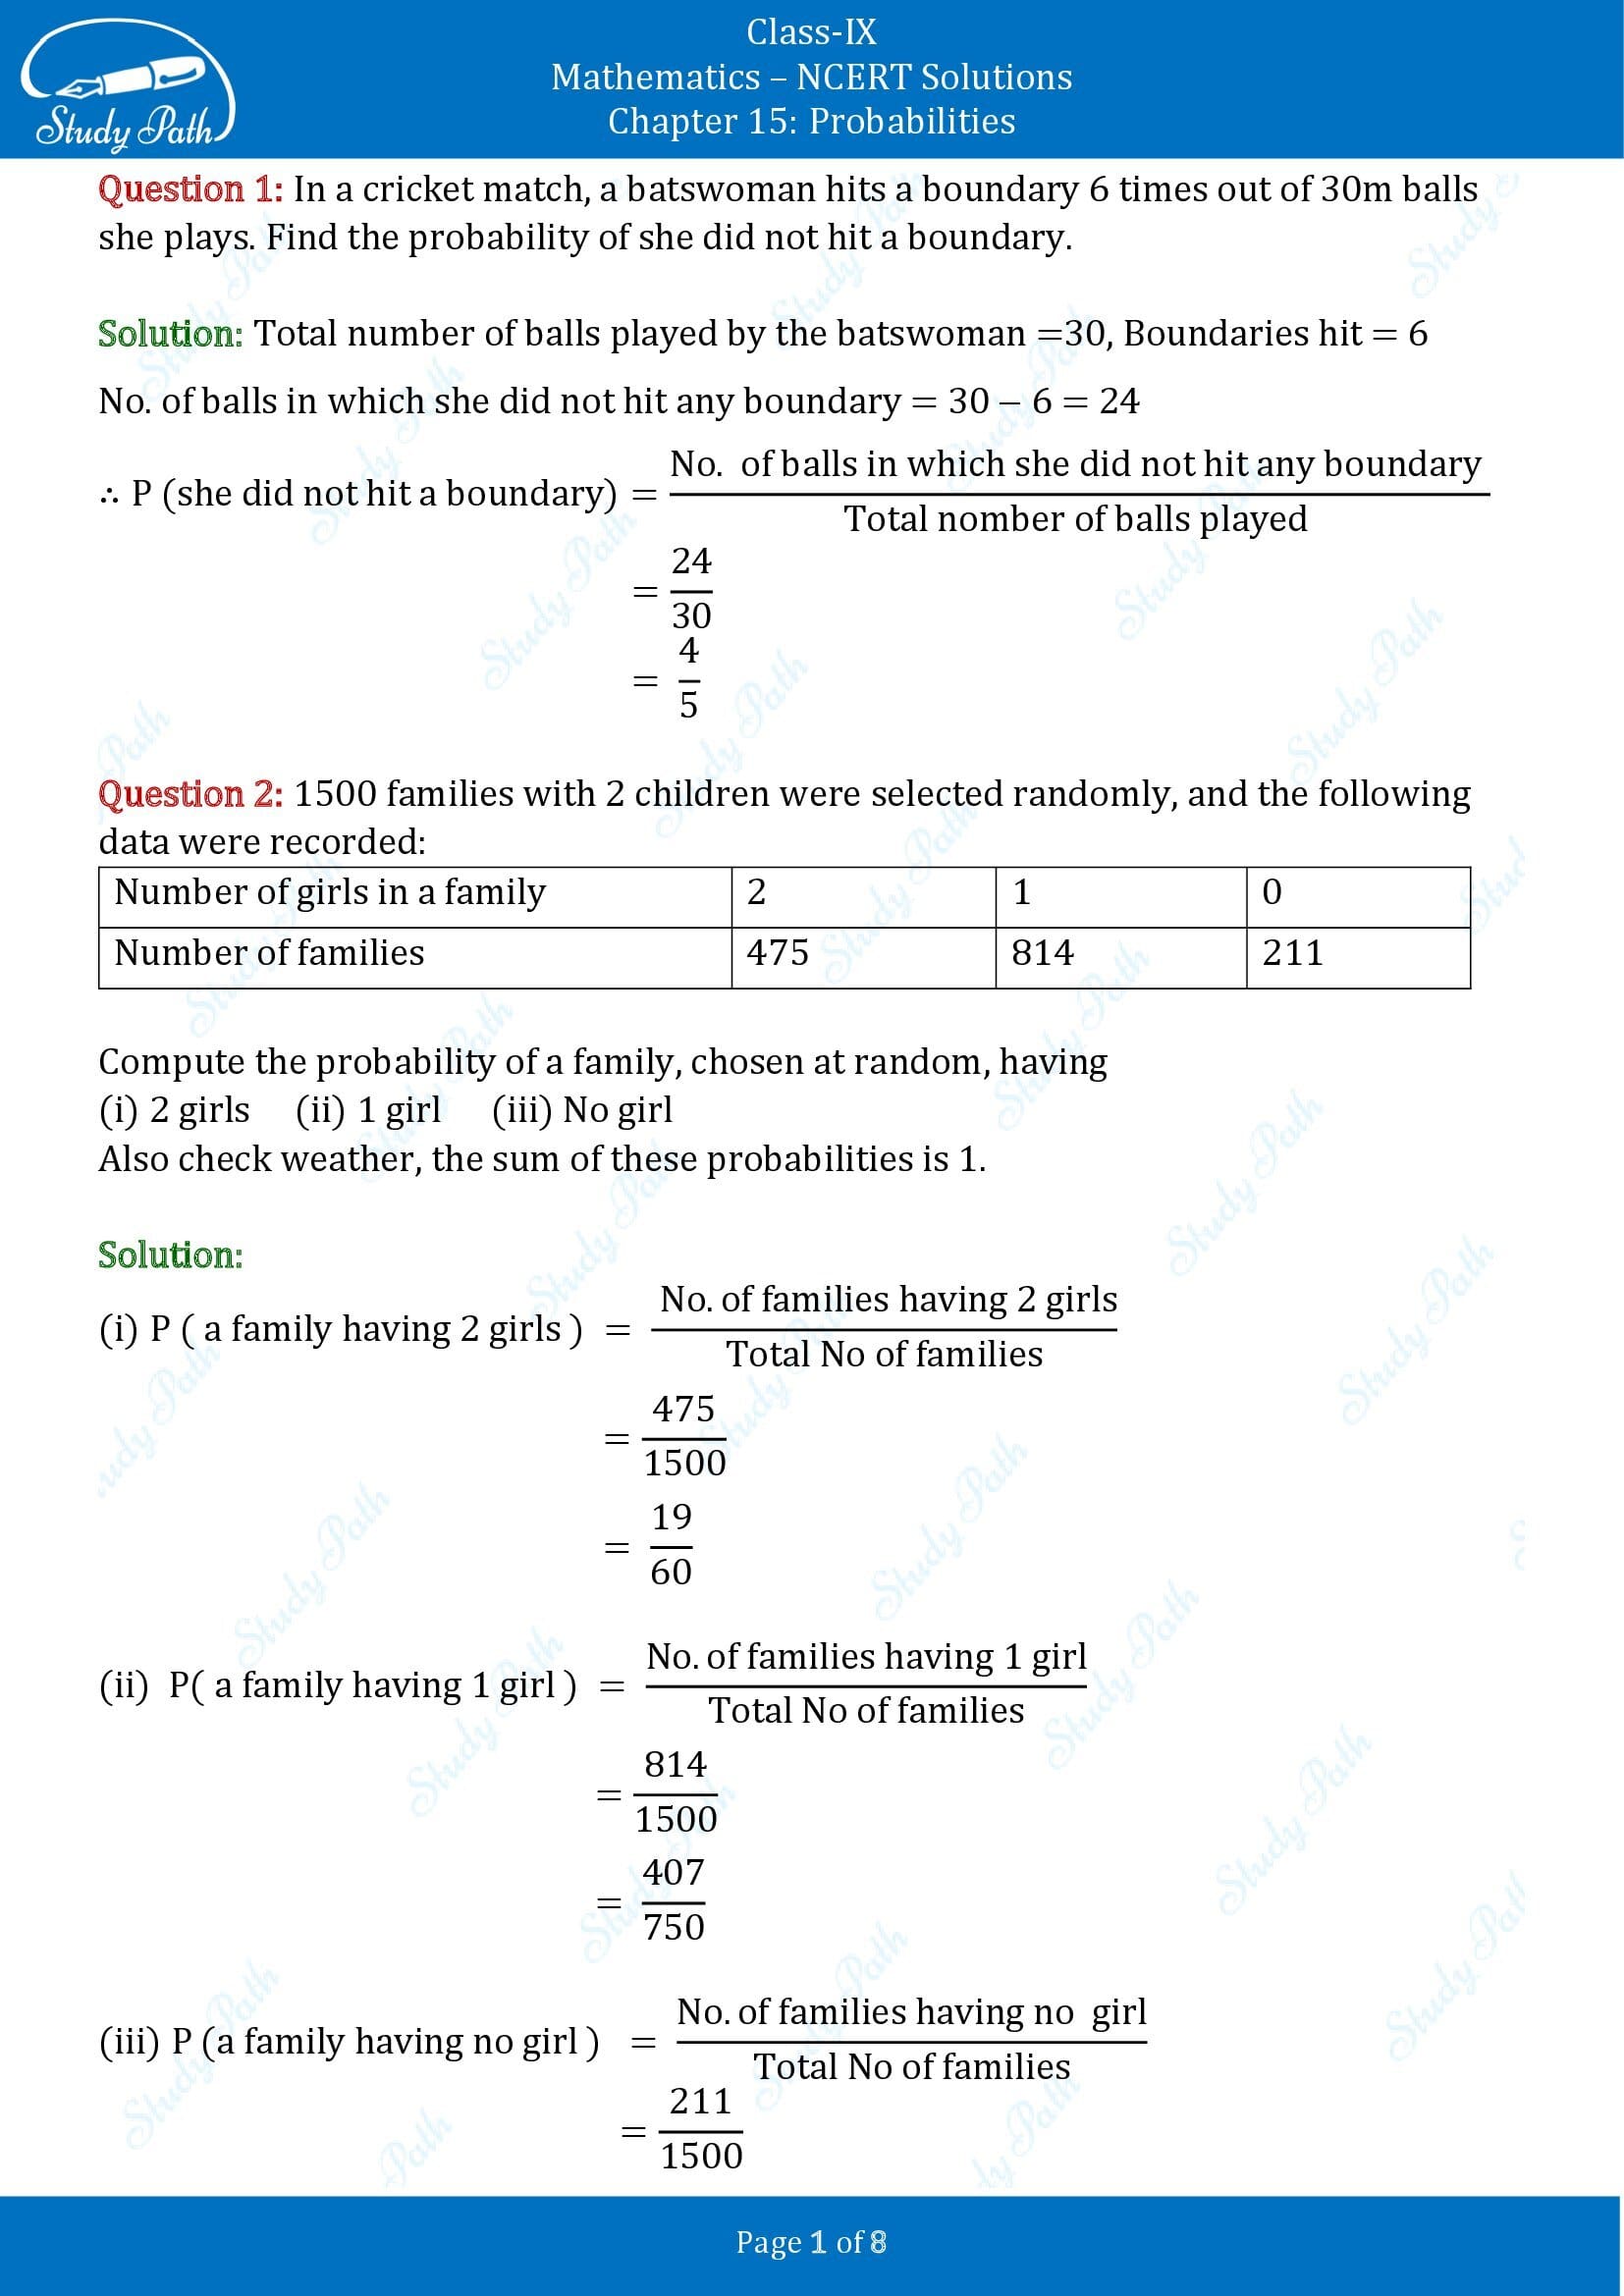 NCERT Solutions for Class 9 Maths Chapter 15 Probabilities 00001